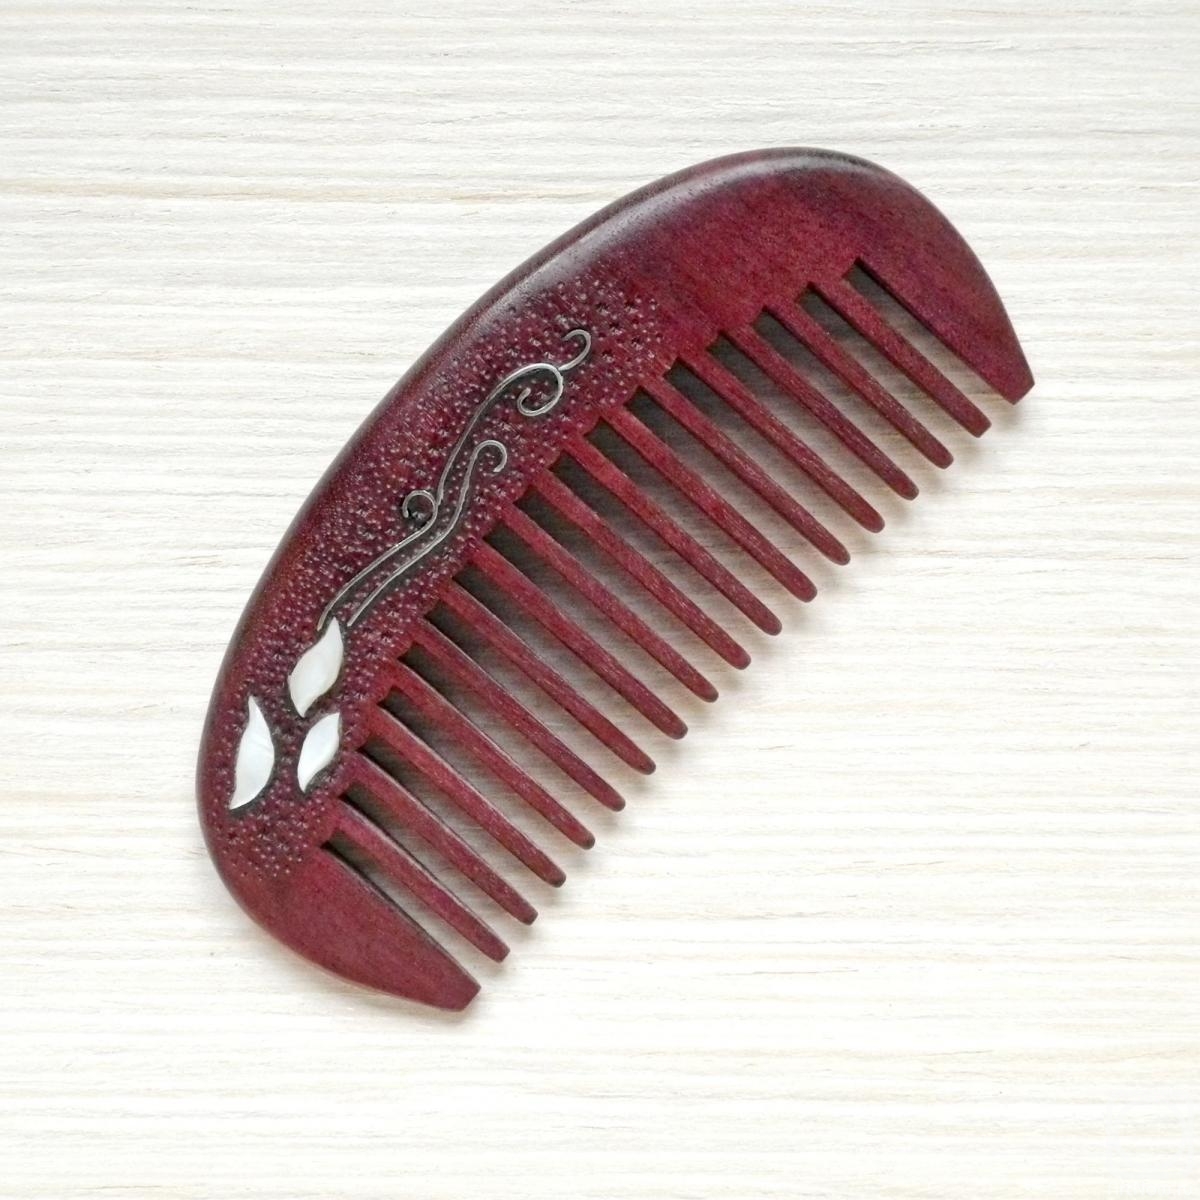 Latyshev Valerii. Amaranth comb with mother of pearl